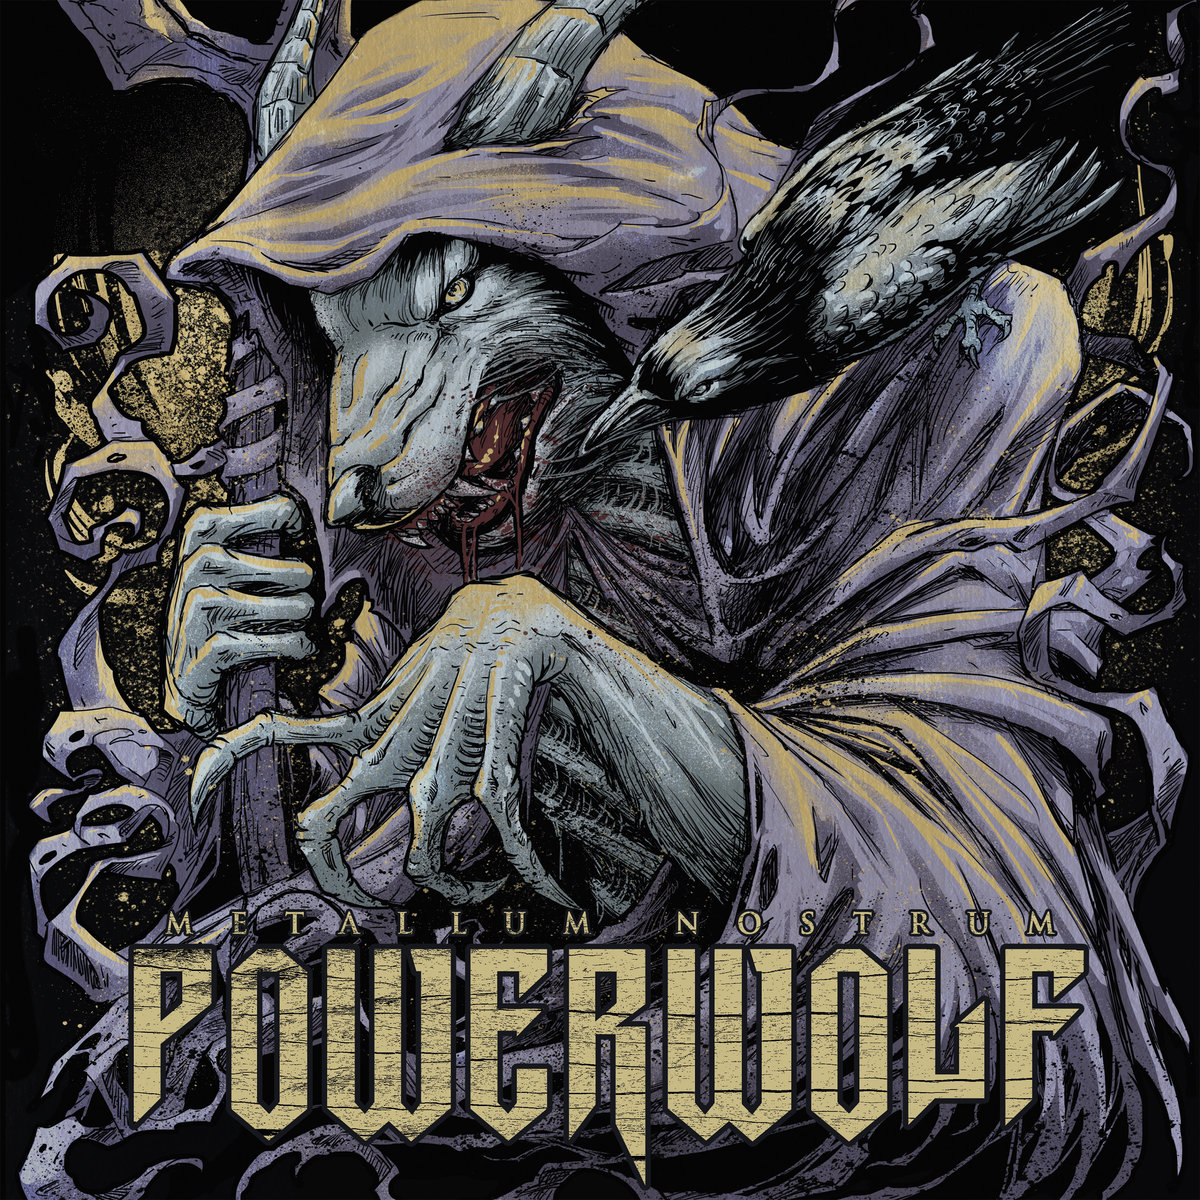 Night of the Werewolves - song and lyrics by Powerwolf